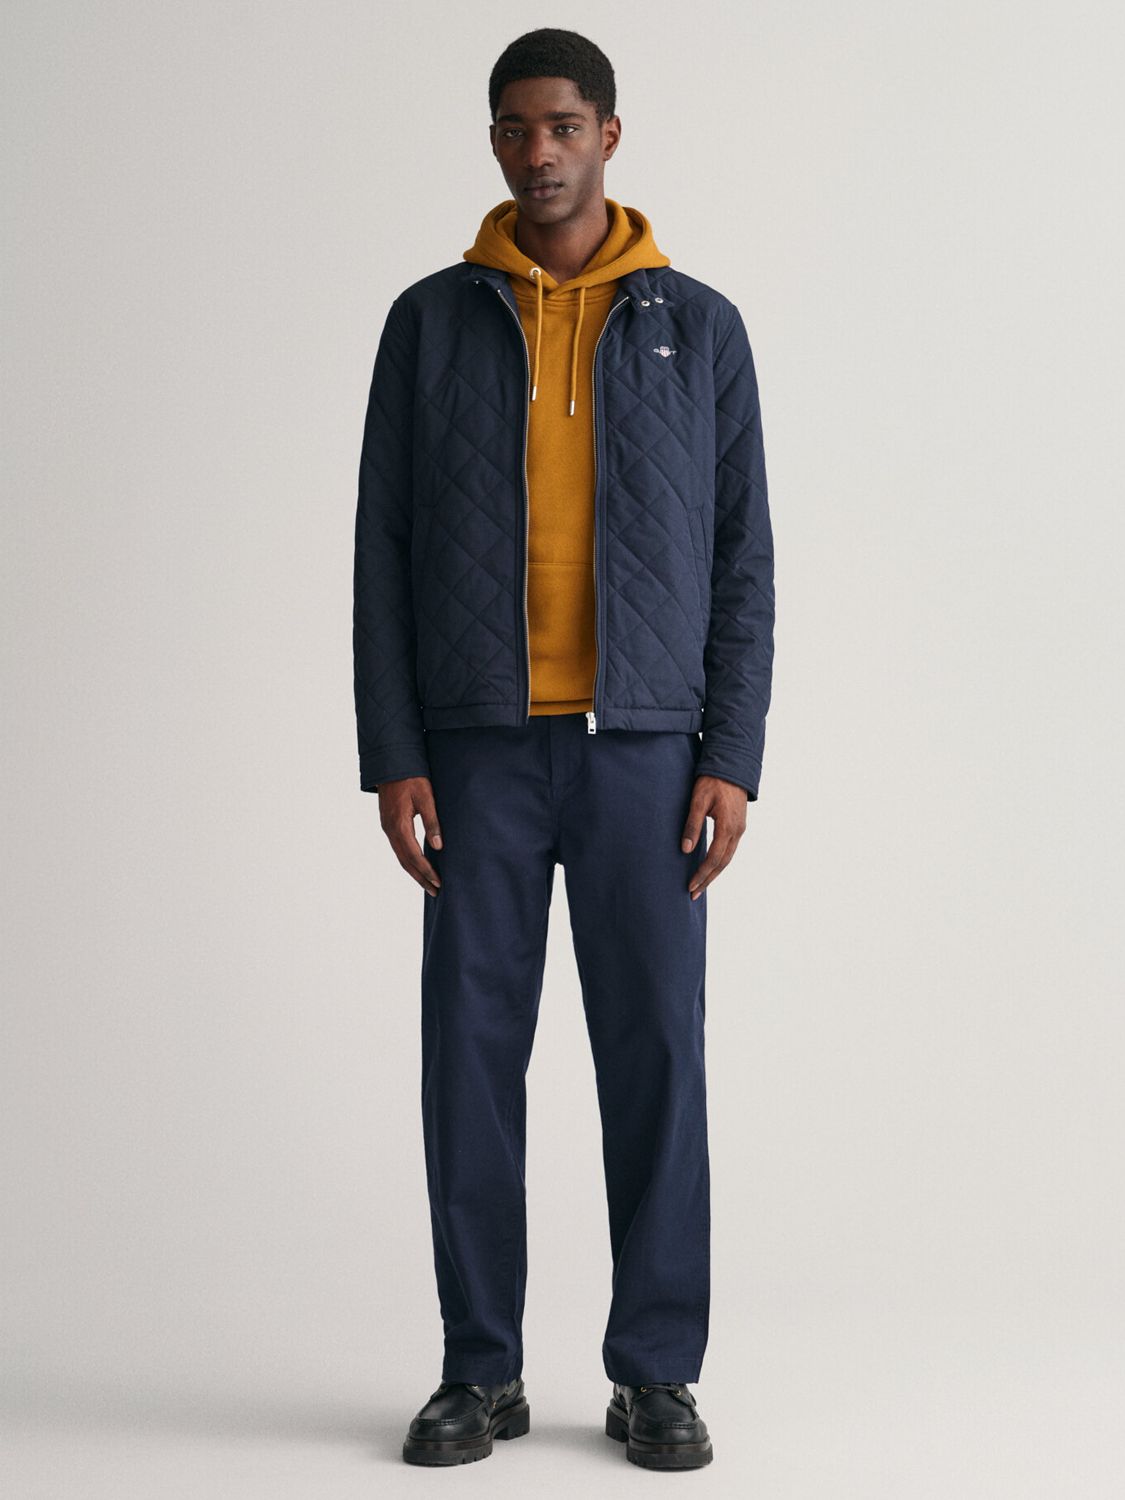 GANT Quilted Windcheater Jacket, 433 Evening Blue at John Lewis & Partners